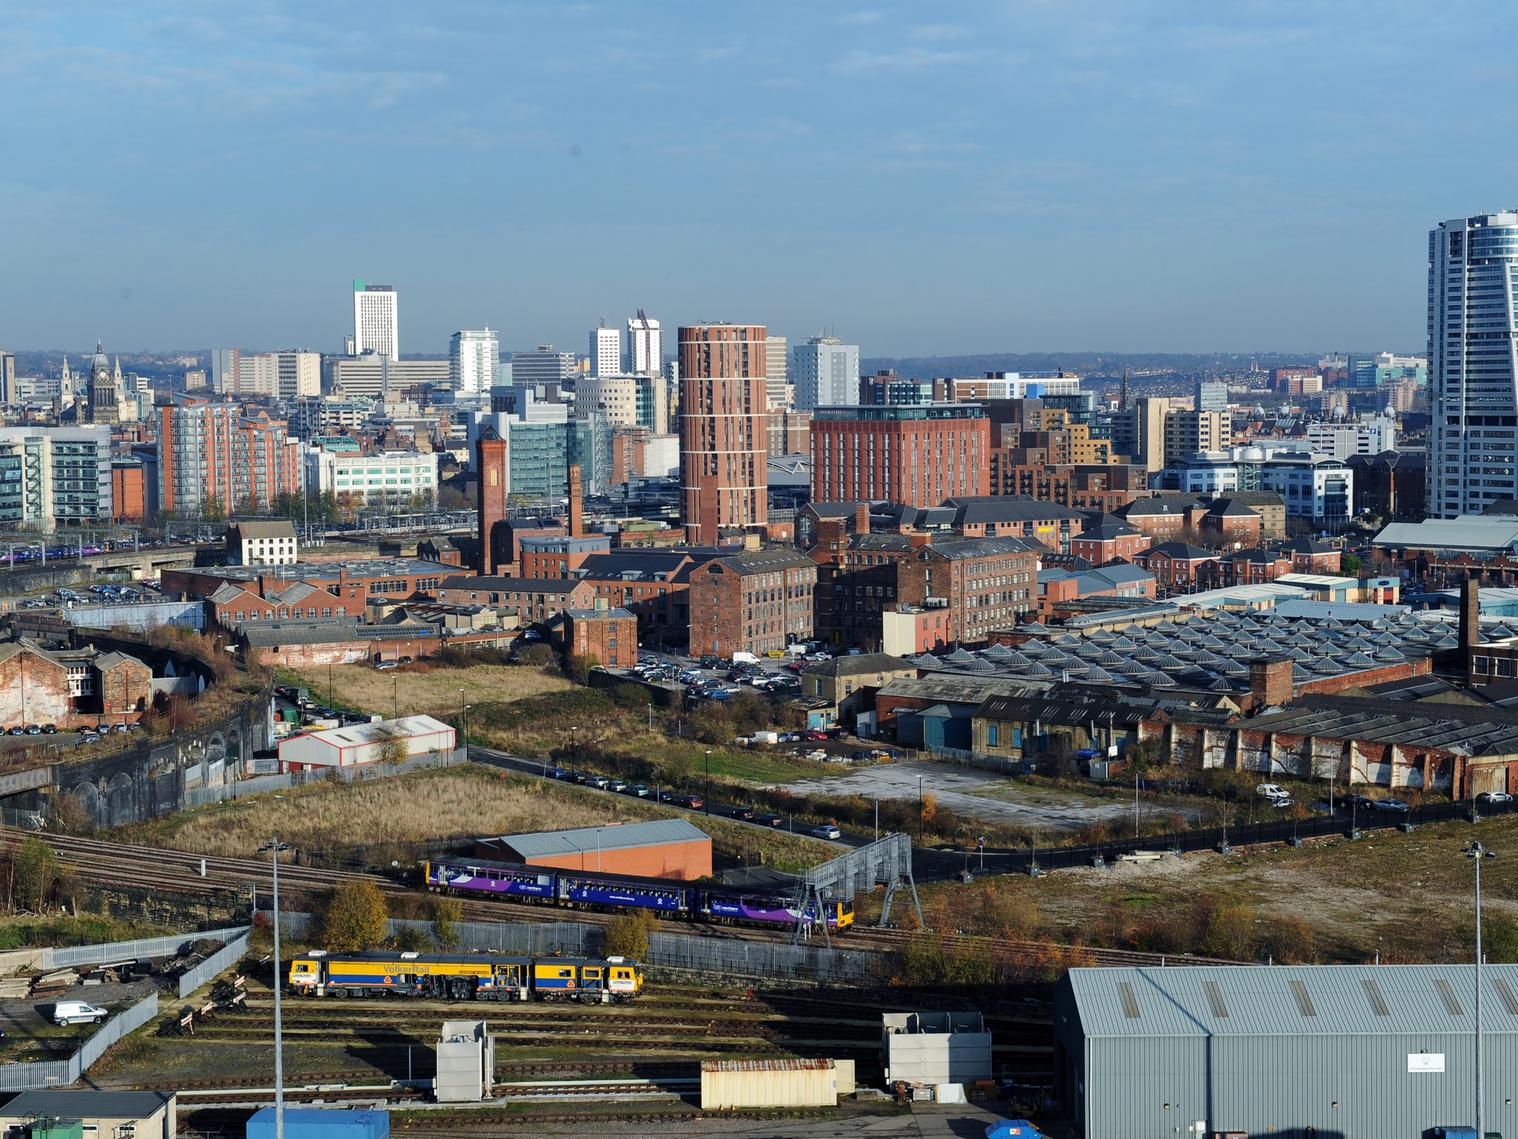 House prices in Beeston & Holbeck have fallen by 20 per cent since 2007